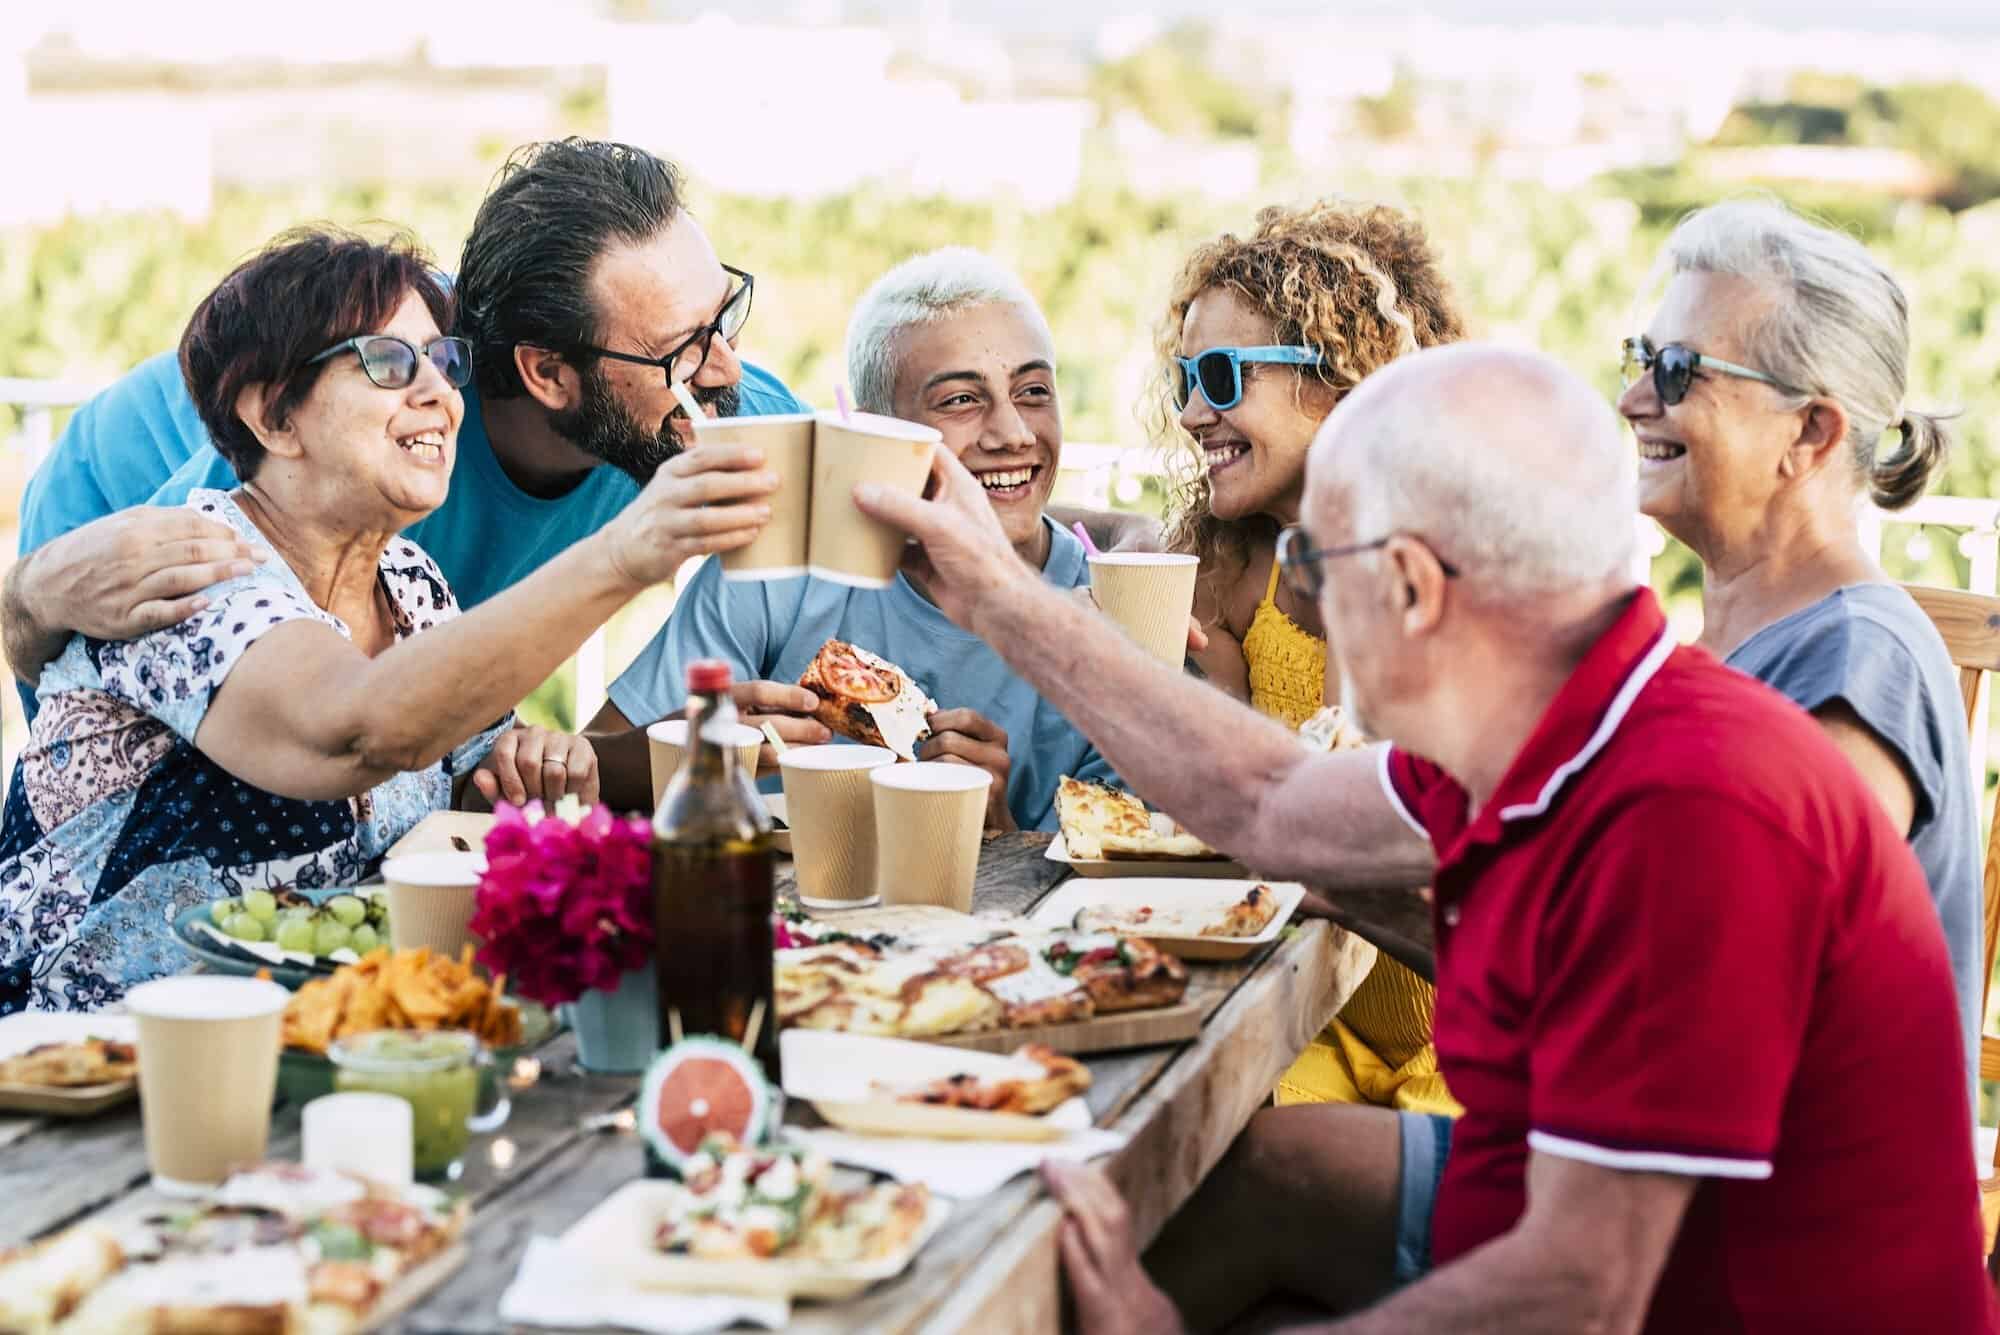 Group of different ages people celebrate and eat together